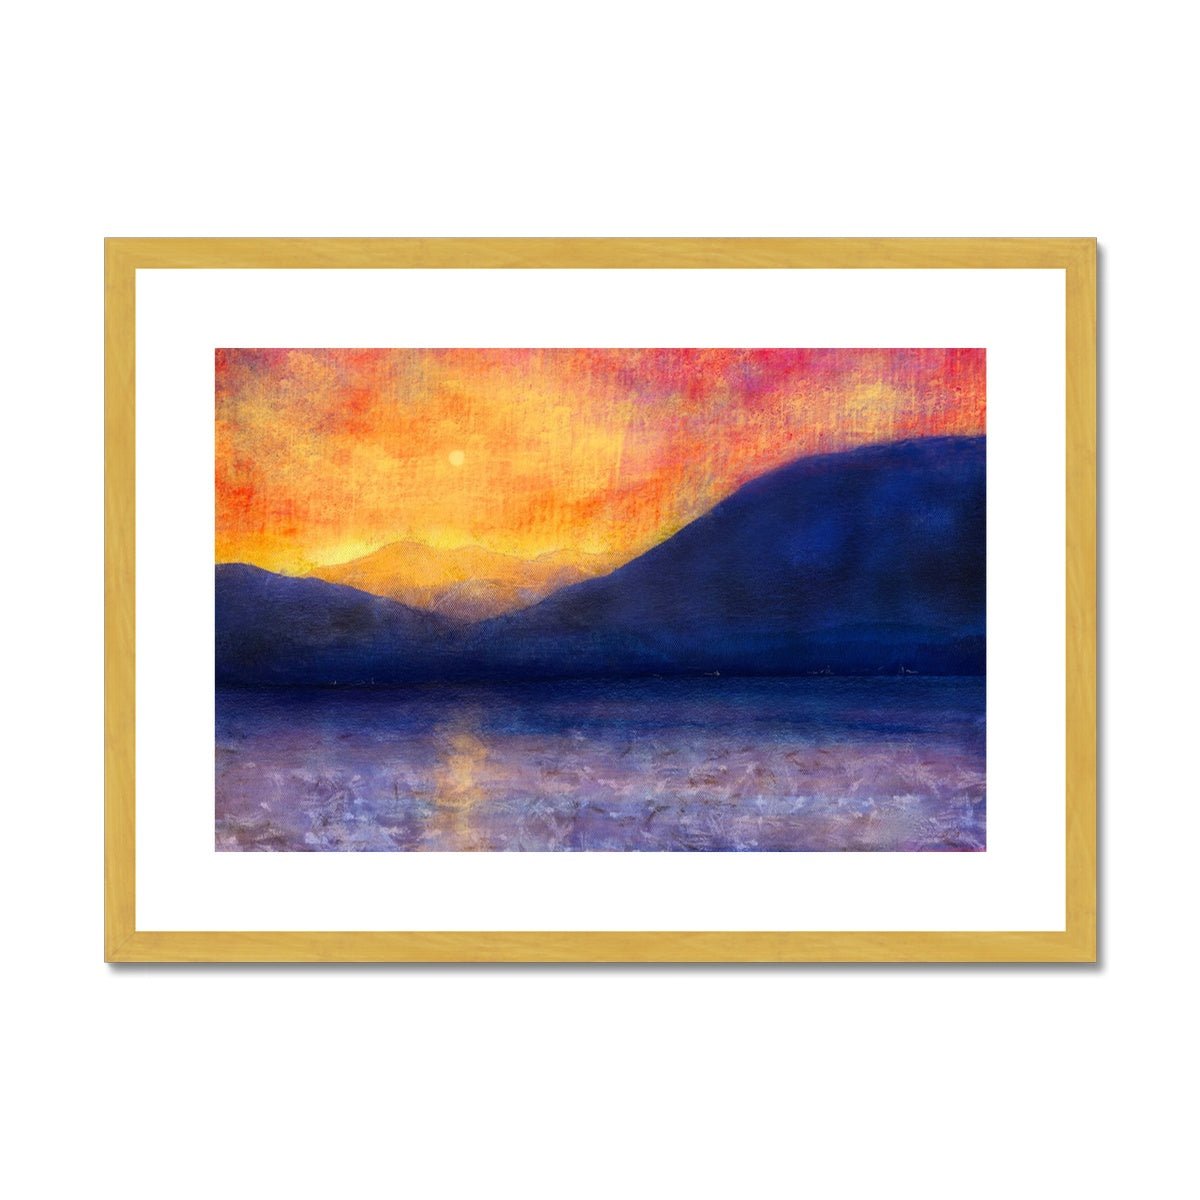 Sunset Approaching Mull Painting | Antique Framed & Mounted Prints From Scotland-Antique Framed & Mounted Prints-Hebridean Islands Art Gallery-A2 Landscape-Gold Frame-Paintings, Prints, Homeware, Art Gifts From Scotland By Scottish Artist Kevin Hunter